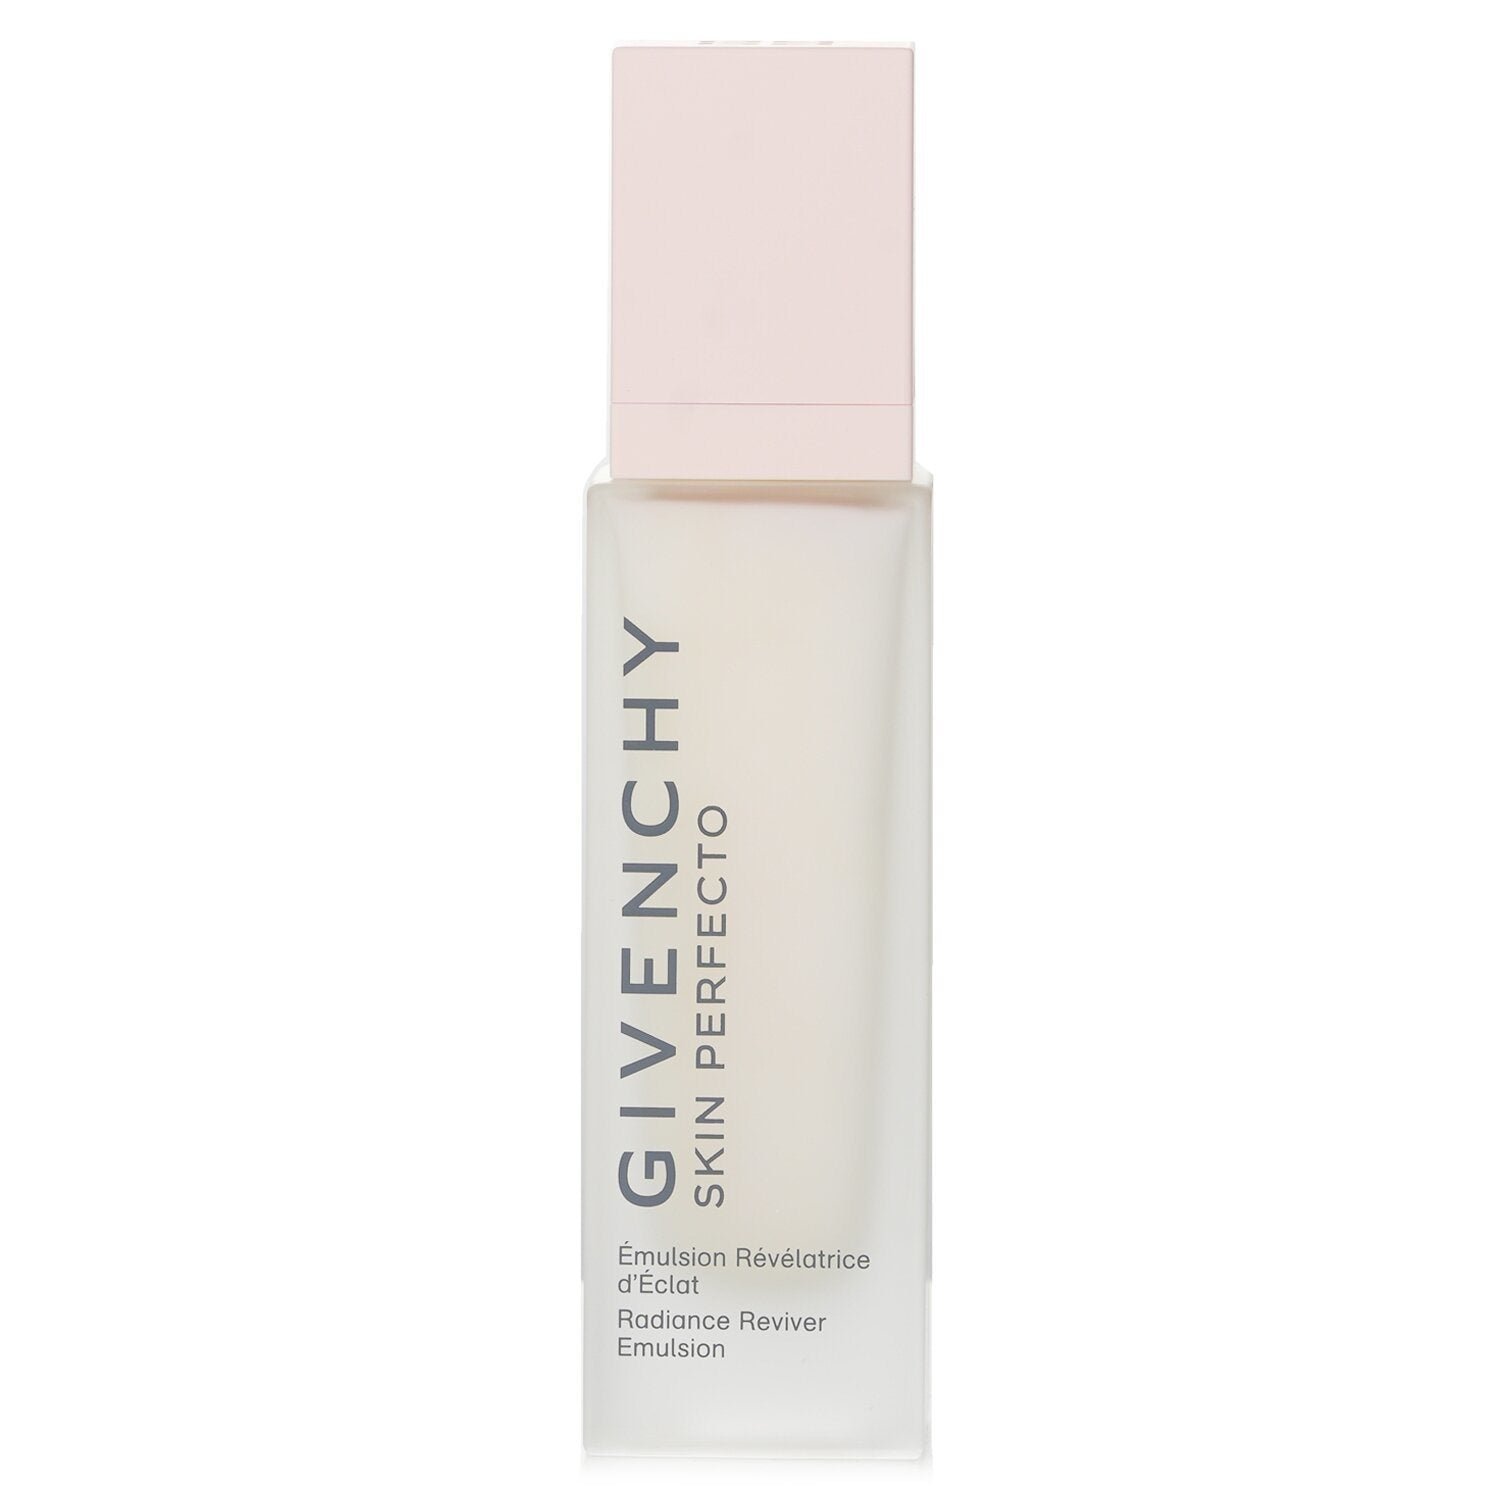 GIVENCHY - Skin Perfecto Radiance Reviver Emulsion - 50ml/1.7oz~3P's Inclusive Beauty